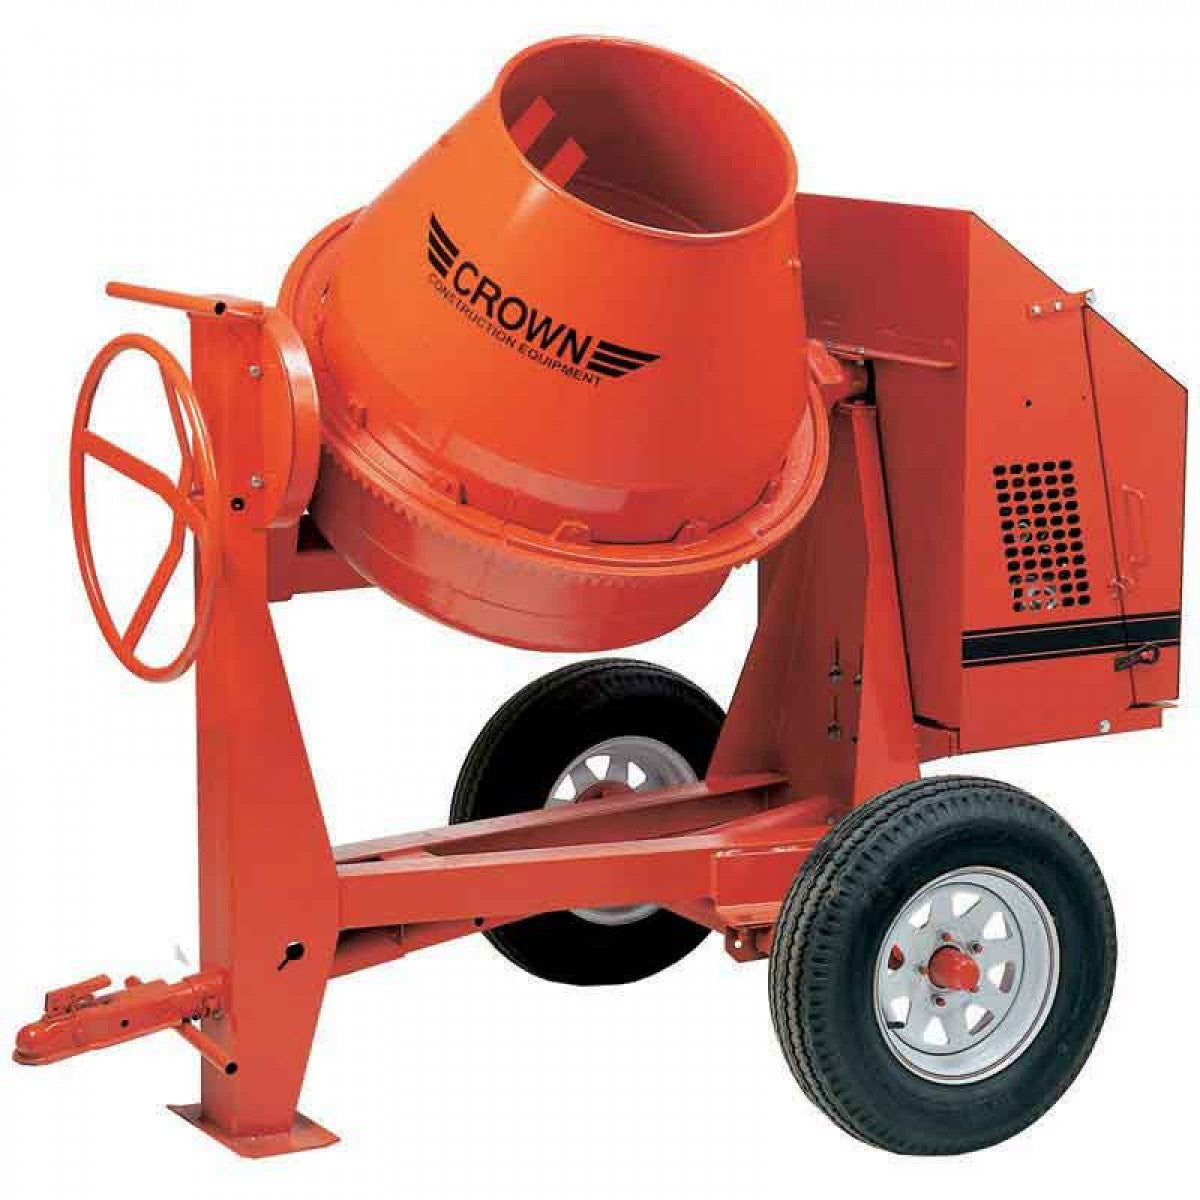 Crown C6 - 6 cu ft Concrete Mixer - FREE DEPOT SHIPPING (conditions apply) (7455345605)